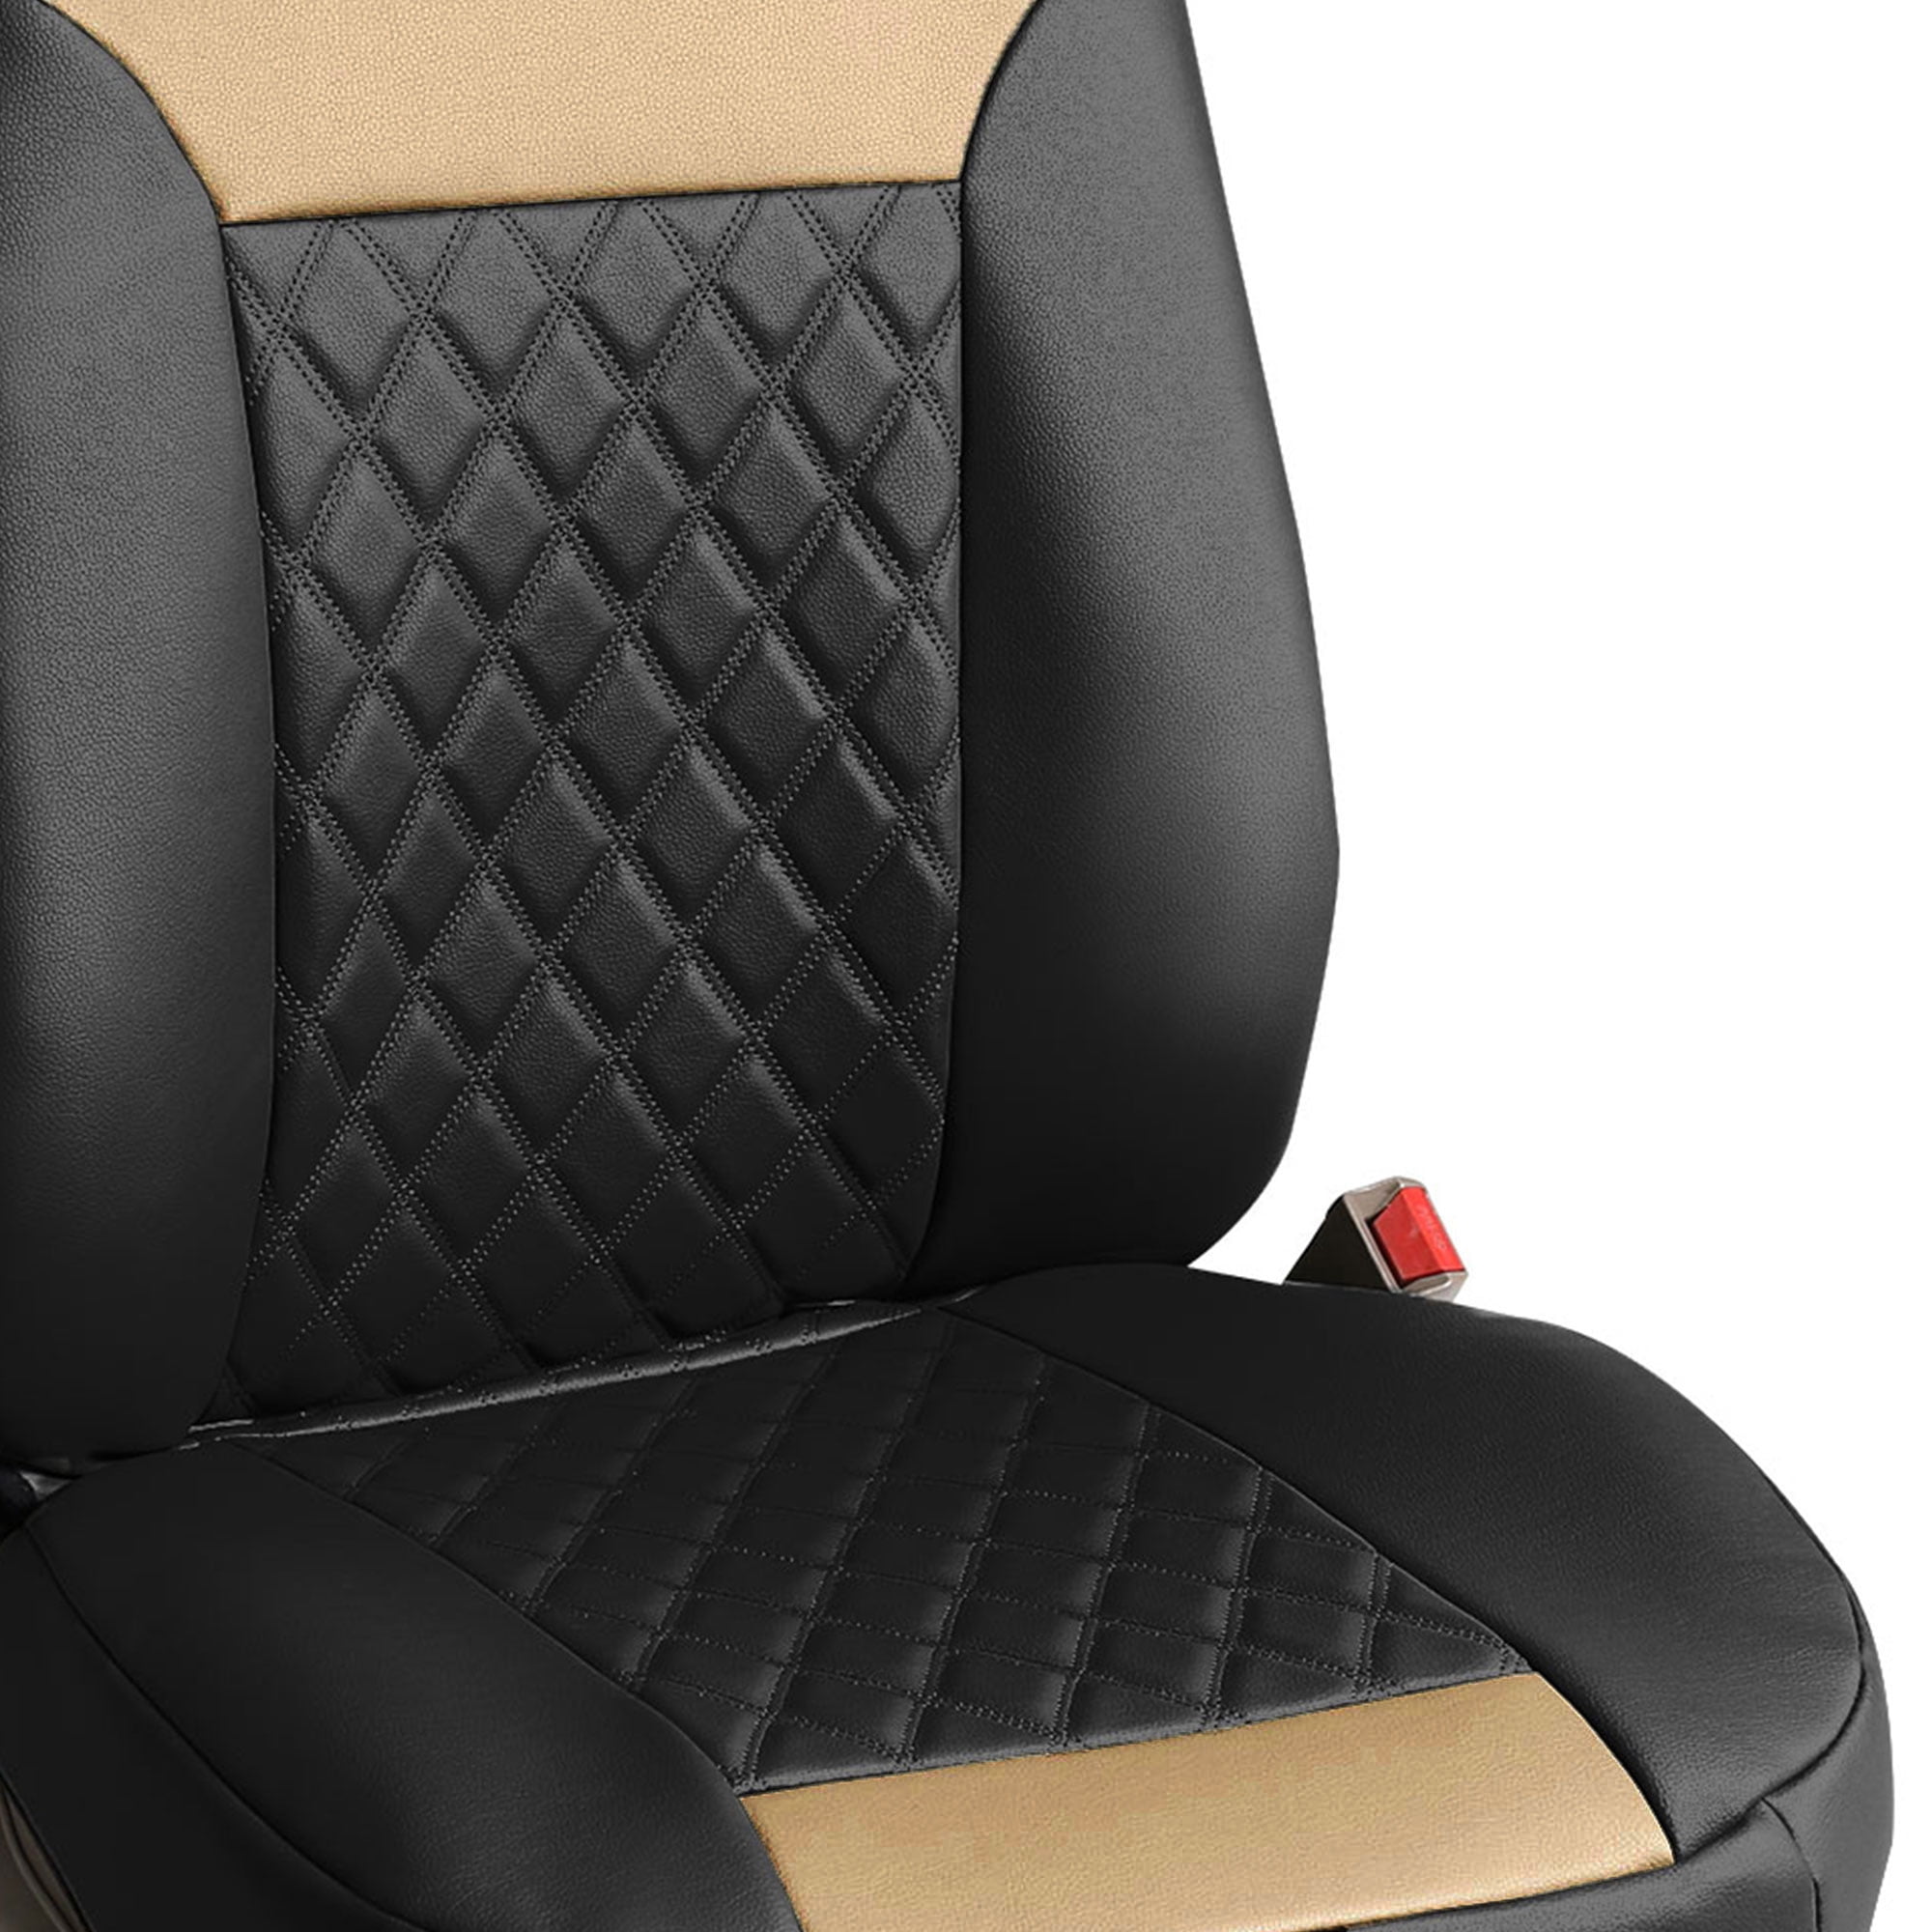 FH Group Car Seat Cushion – Durable PU Leather Car Seat Cushions, 2 Piece Front Set Car Seat Cushion, Bottom Seat Protector, Water Resistant Car